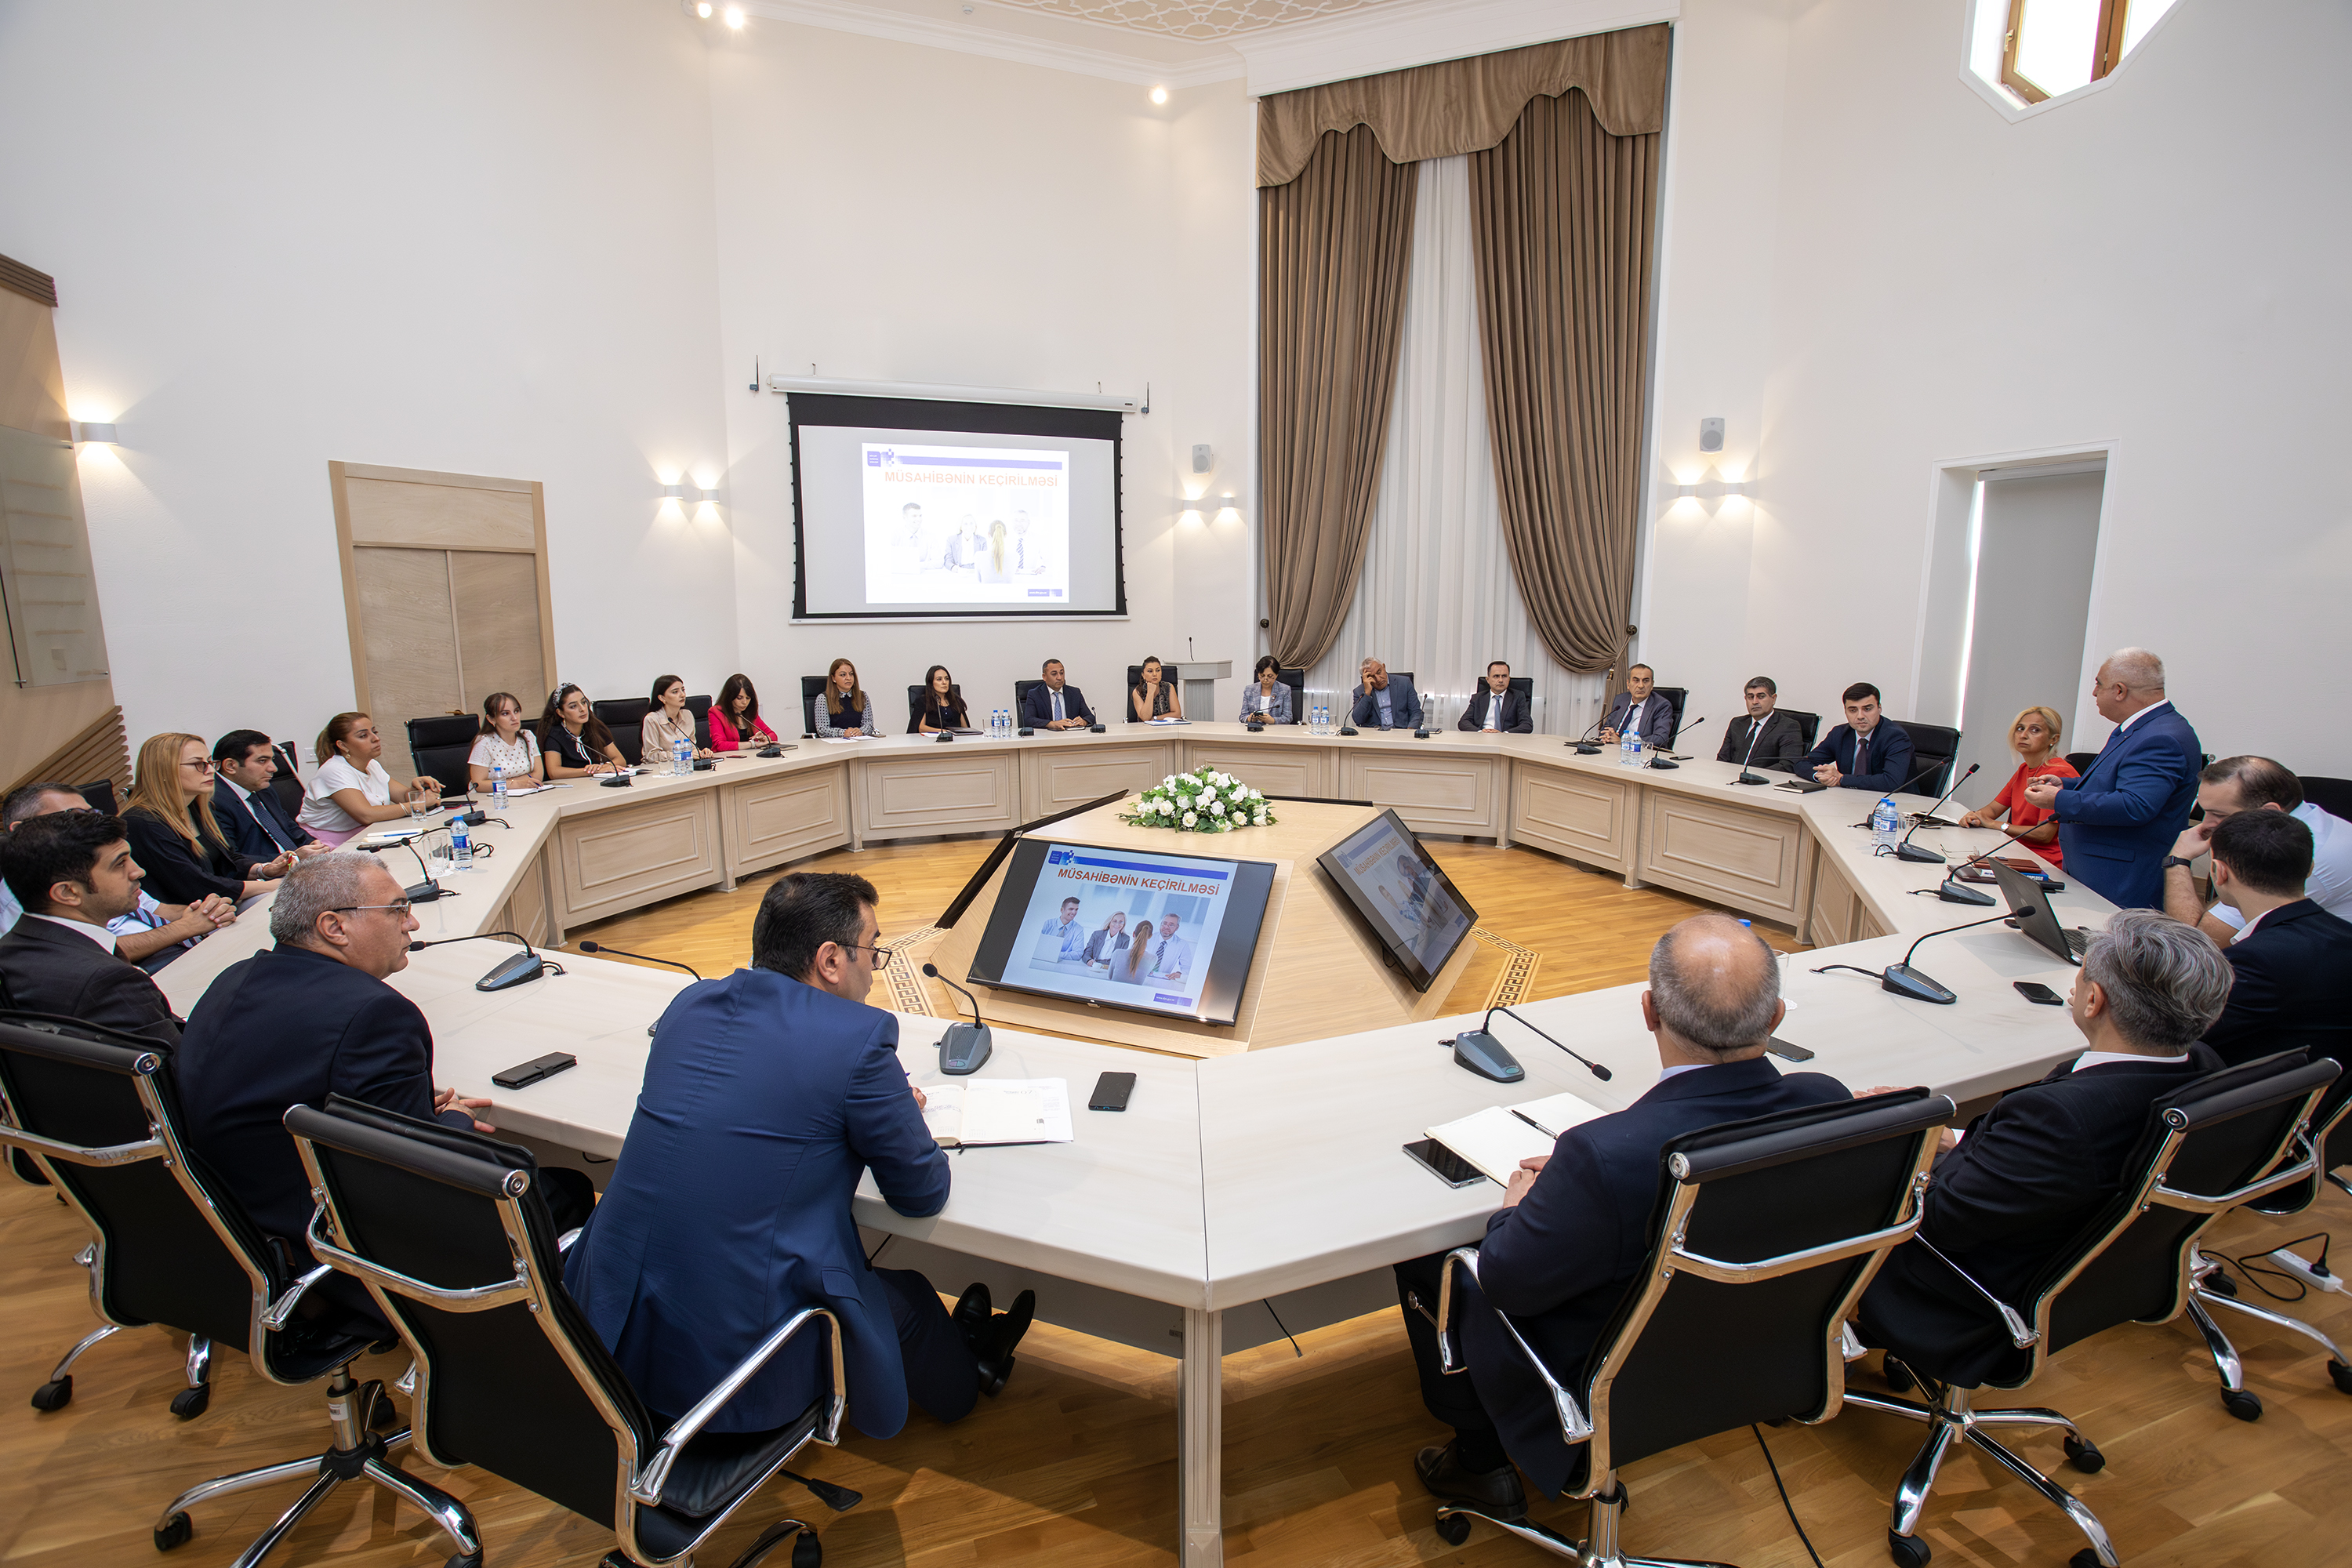 Next training was held at the Ministry of Energy